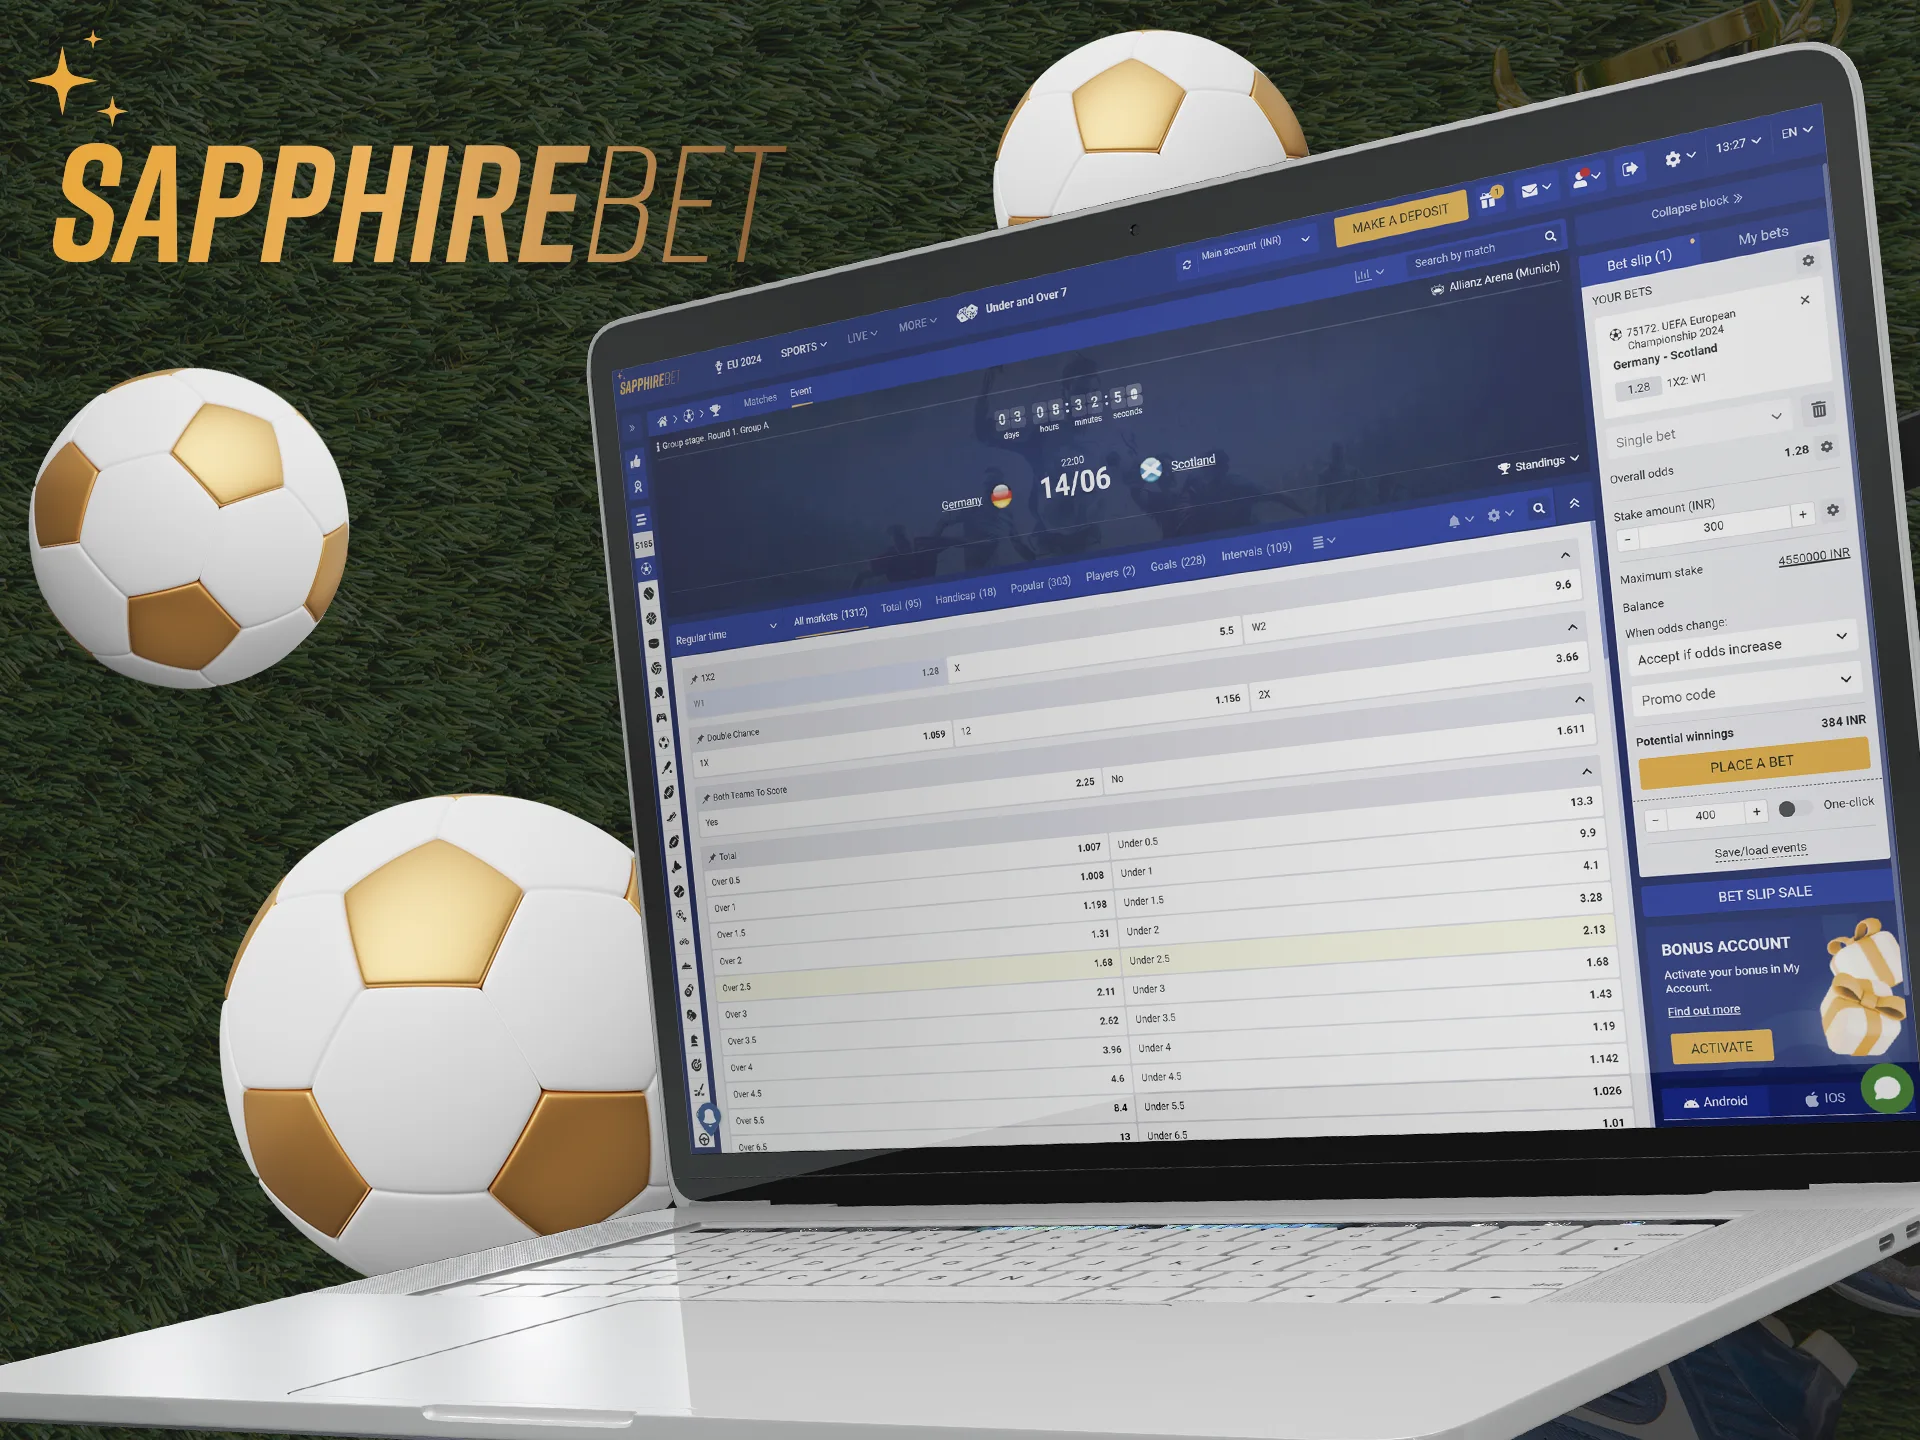 Make your betting decision at SapphireBet.